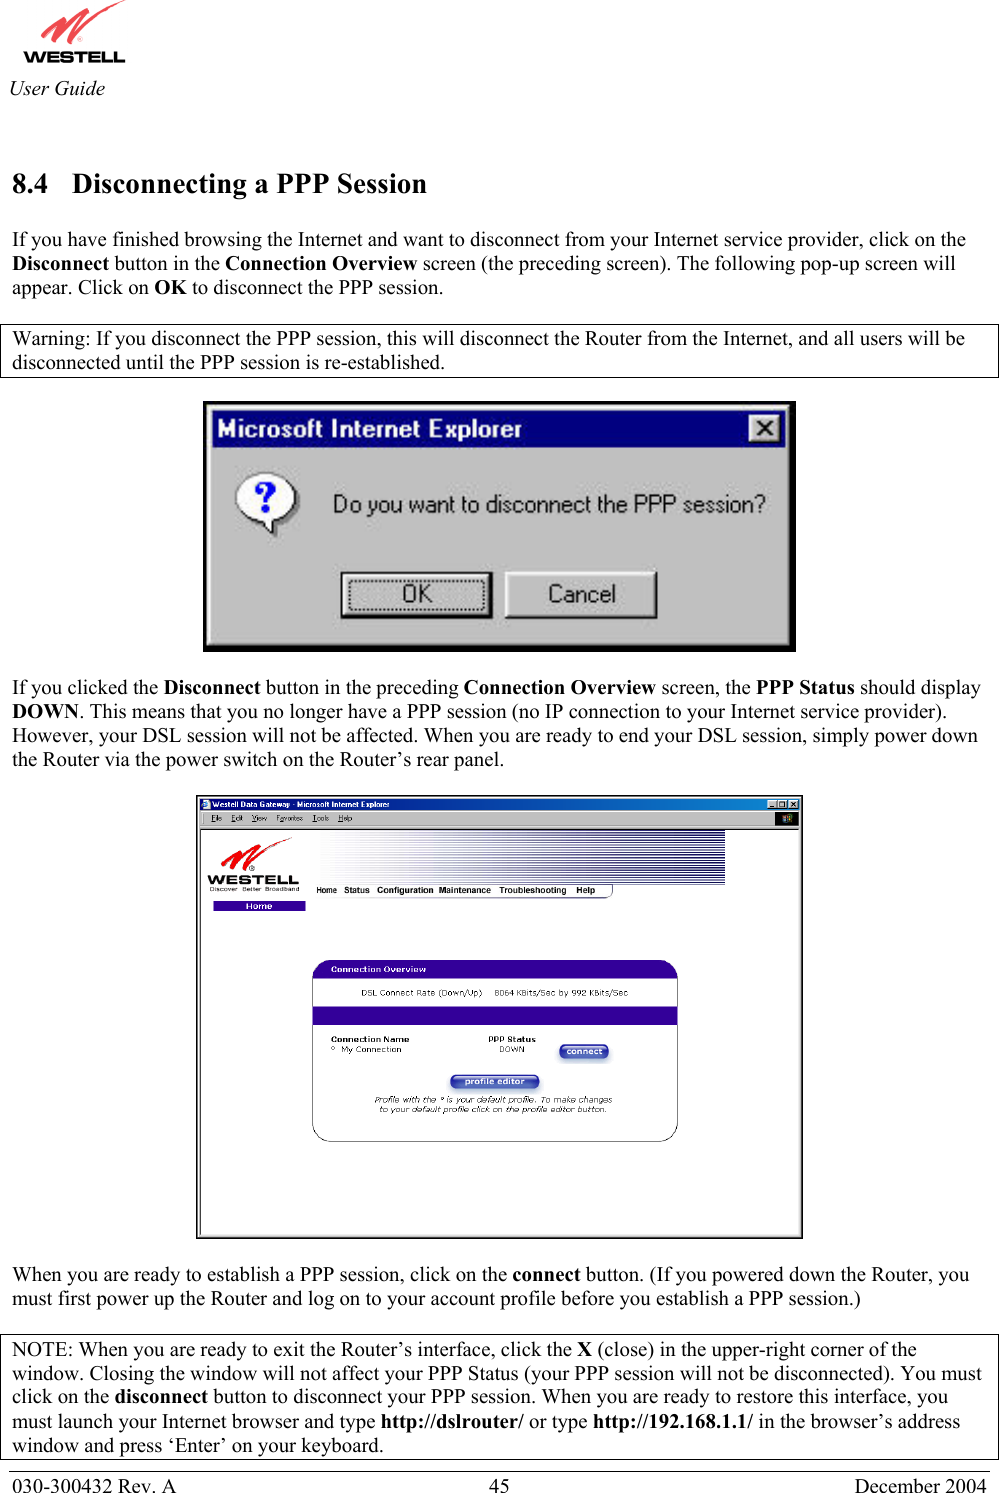       030-300432 Rev. A  45 December 2004  User Guide  8.4  Disconnecting a PPP Session  If you have finished browsing the Internet and want to disconnect from your Internet service provider, click on the Disconnect button in the Connection Overview screen (the preceding screen). The following pop-up screen will appear. Click on OK to disconnect the PPP session.  Warning: If you disconnect the PPP session, this will disconnect the Router from the Internet, and all users will be disconnected until the PPP session is re-established.    If you clicked the Disconnect button in the preceding Connection Overview screen, the PPP Status should display DOWN. This means that you no longer have a PPP session (no IP connection to your Internet service provider). However, your DSL session will not be affected. When you are ready to end your DSL session, simply power down the Router via the power switch on the Router’s rear panel.     When you are ready to establish a PPP session, click on the connect button. (If you powered down the Router, you must first power up the Router and log on to your account profile before you establish a PPP session.)  NOTE: When you are ready to exit the Router’s interface, click the X (close) in the upper-right corner of the window. Closing the window will not affect your PPP Status (your PPP session will not be disconnected). You must click on the disconnect button to disconnect your PPP session. When you are ready to restore this interface, you must launch your Internet browser and type http://dslrouter/ or type http://192.168.1.1/ in the browser’s address window and press ‘Enter’ on your keyboard. 